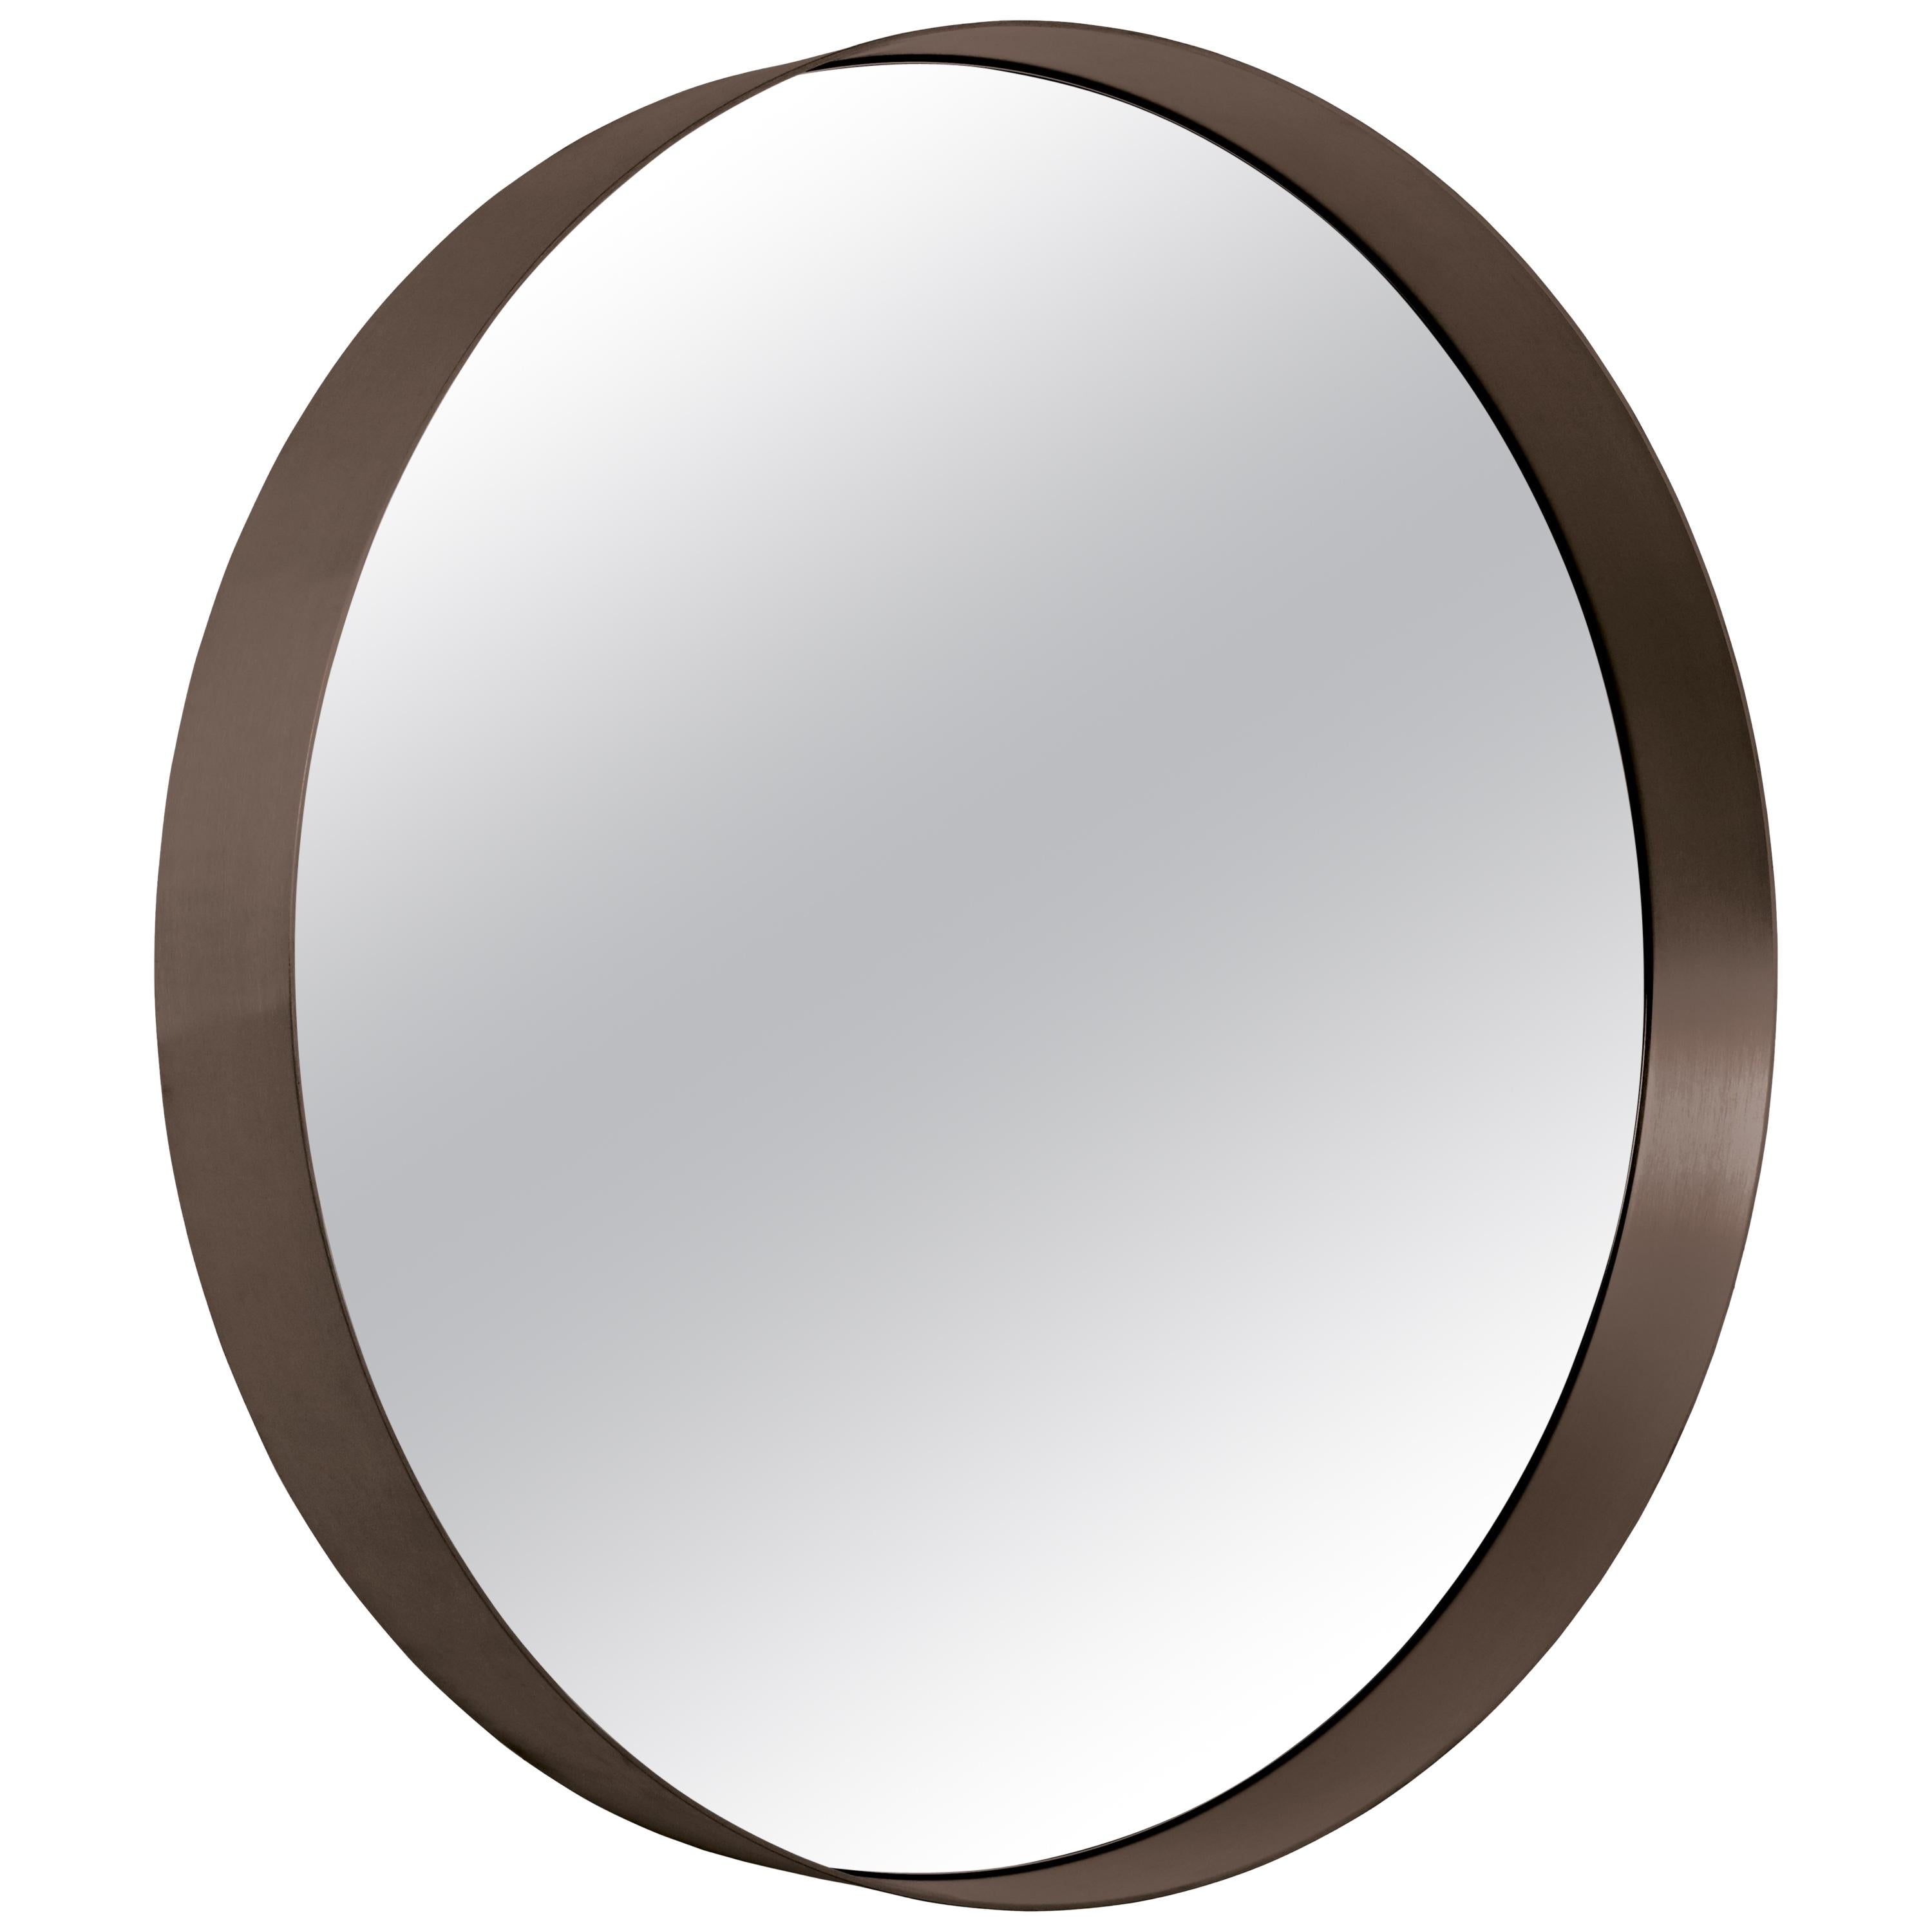 ClassiCon Cypris Round Mirror in Burnished Brass by Nina Mair